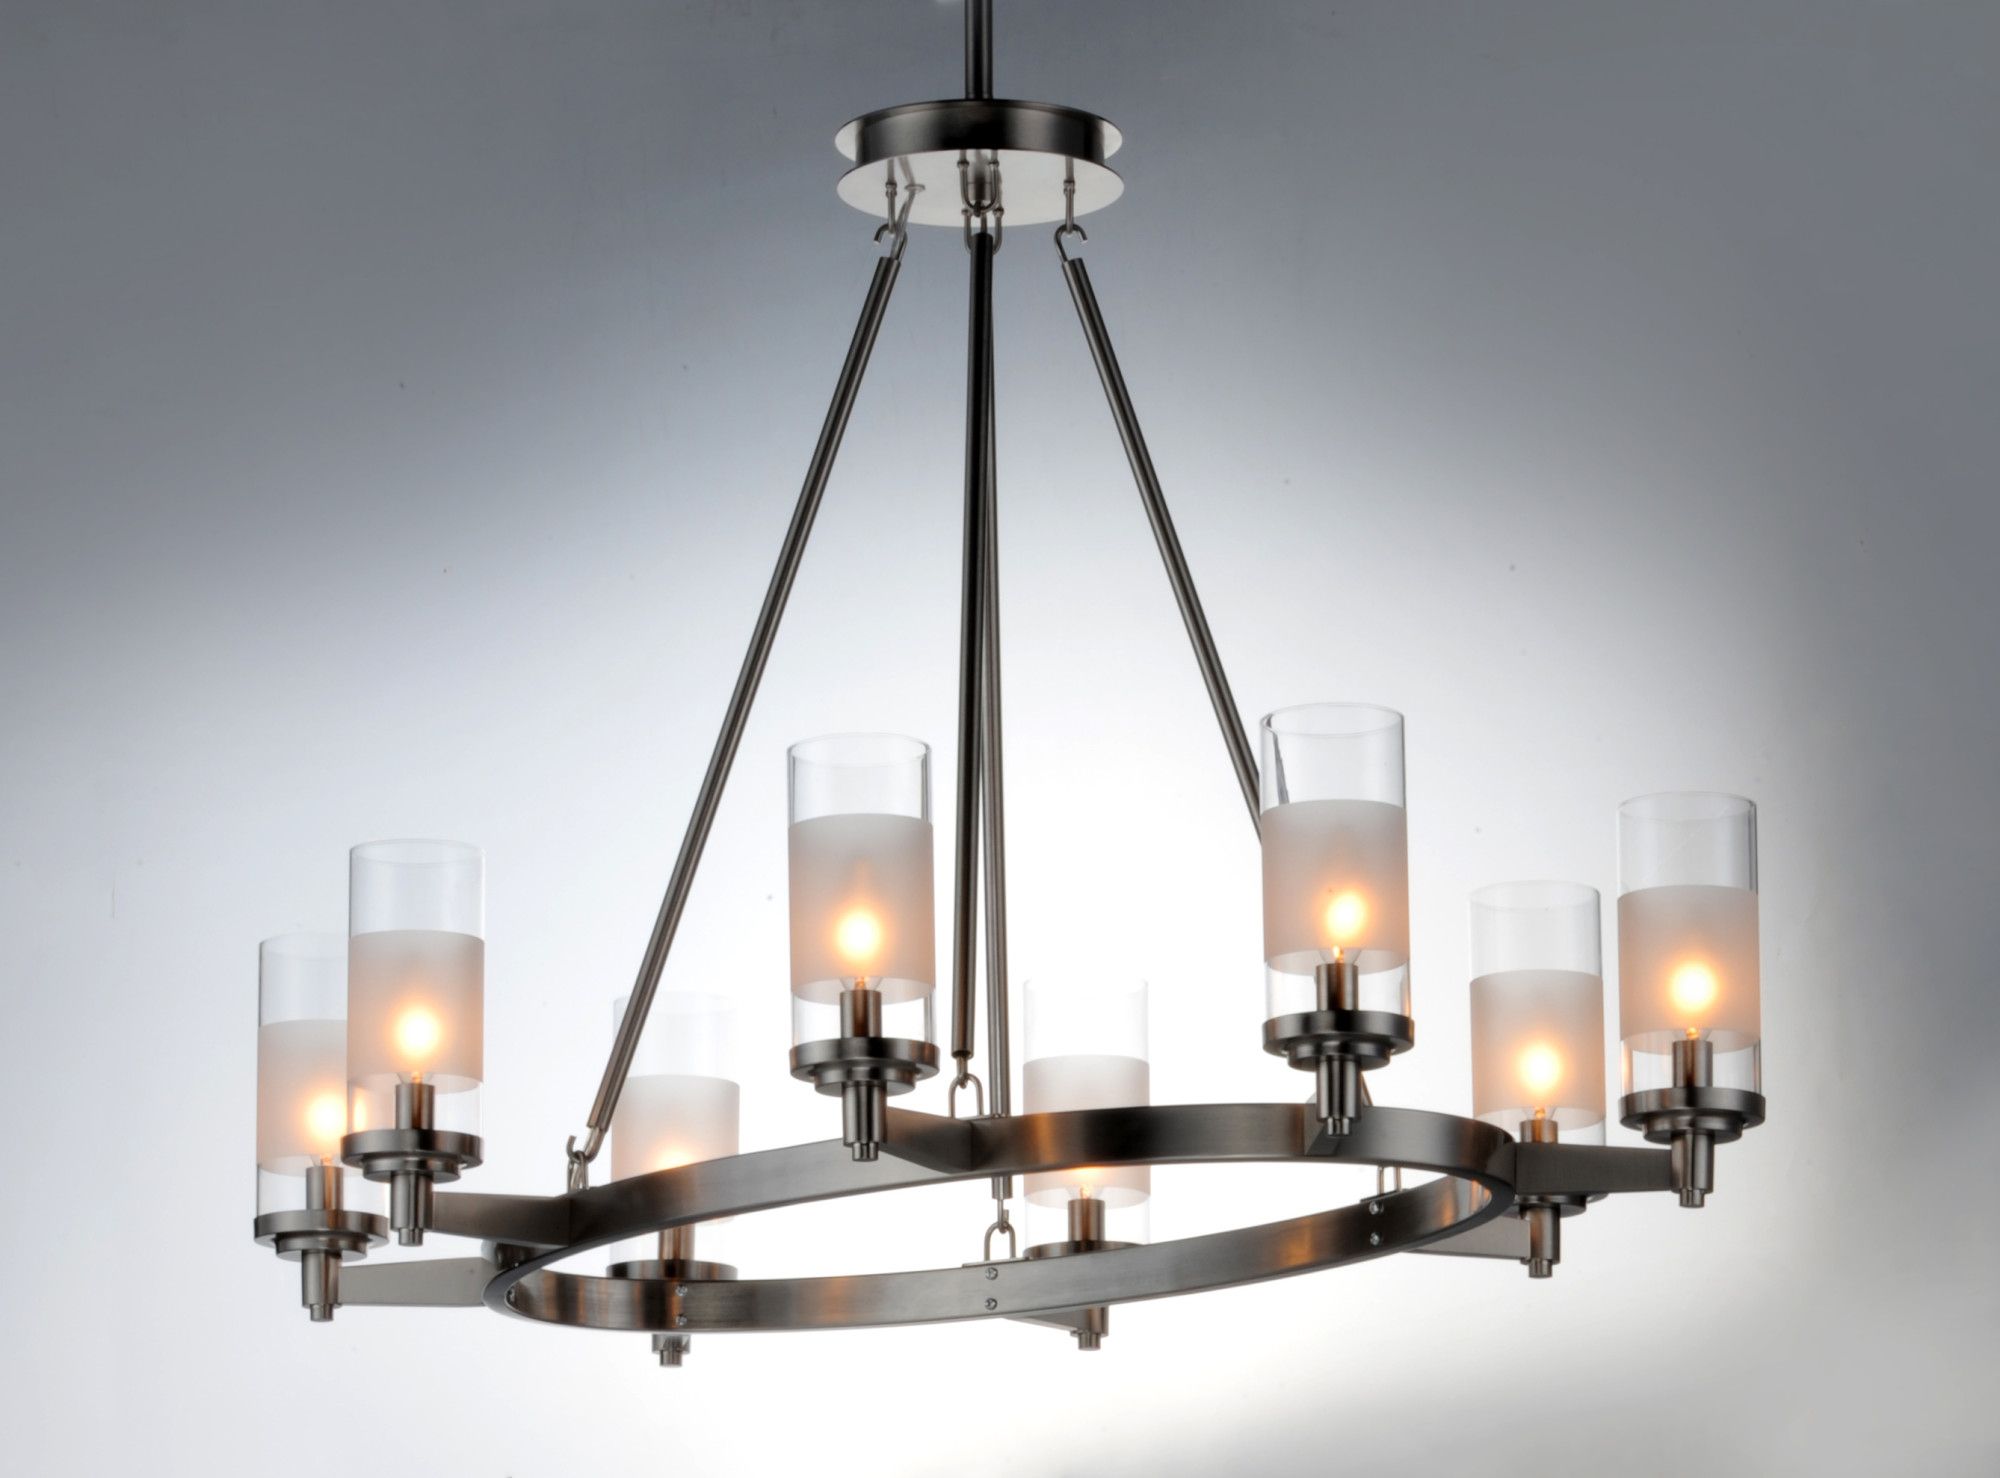 Maxim 26328clft Bronze Crescendo 8 Light 36" Oval Throughout Popular Bronze Oval Chandeliers (View 3 of 20)